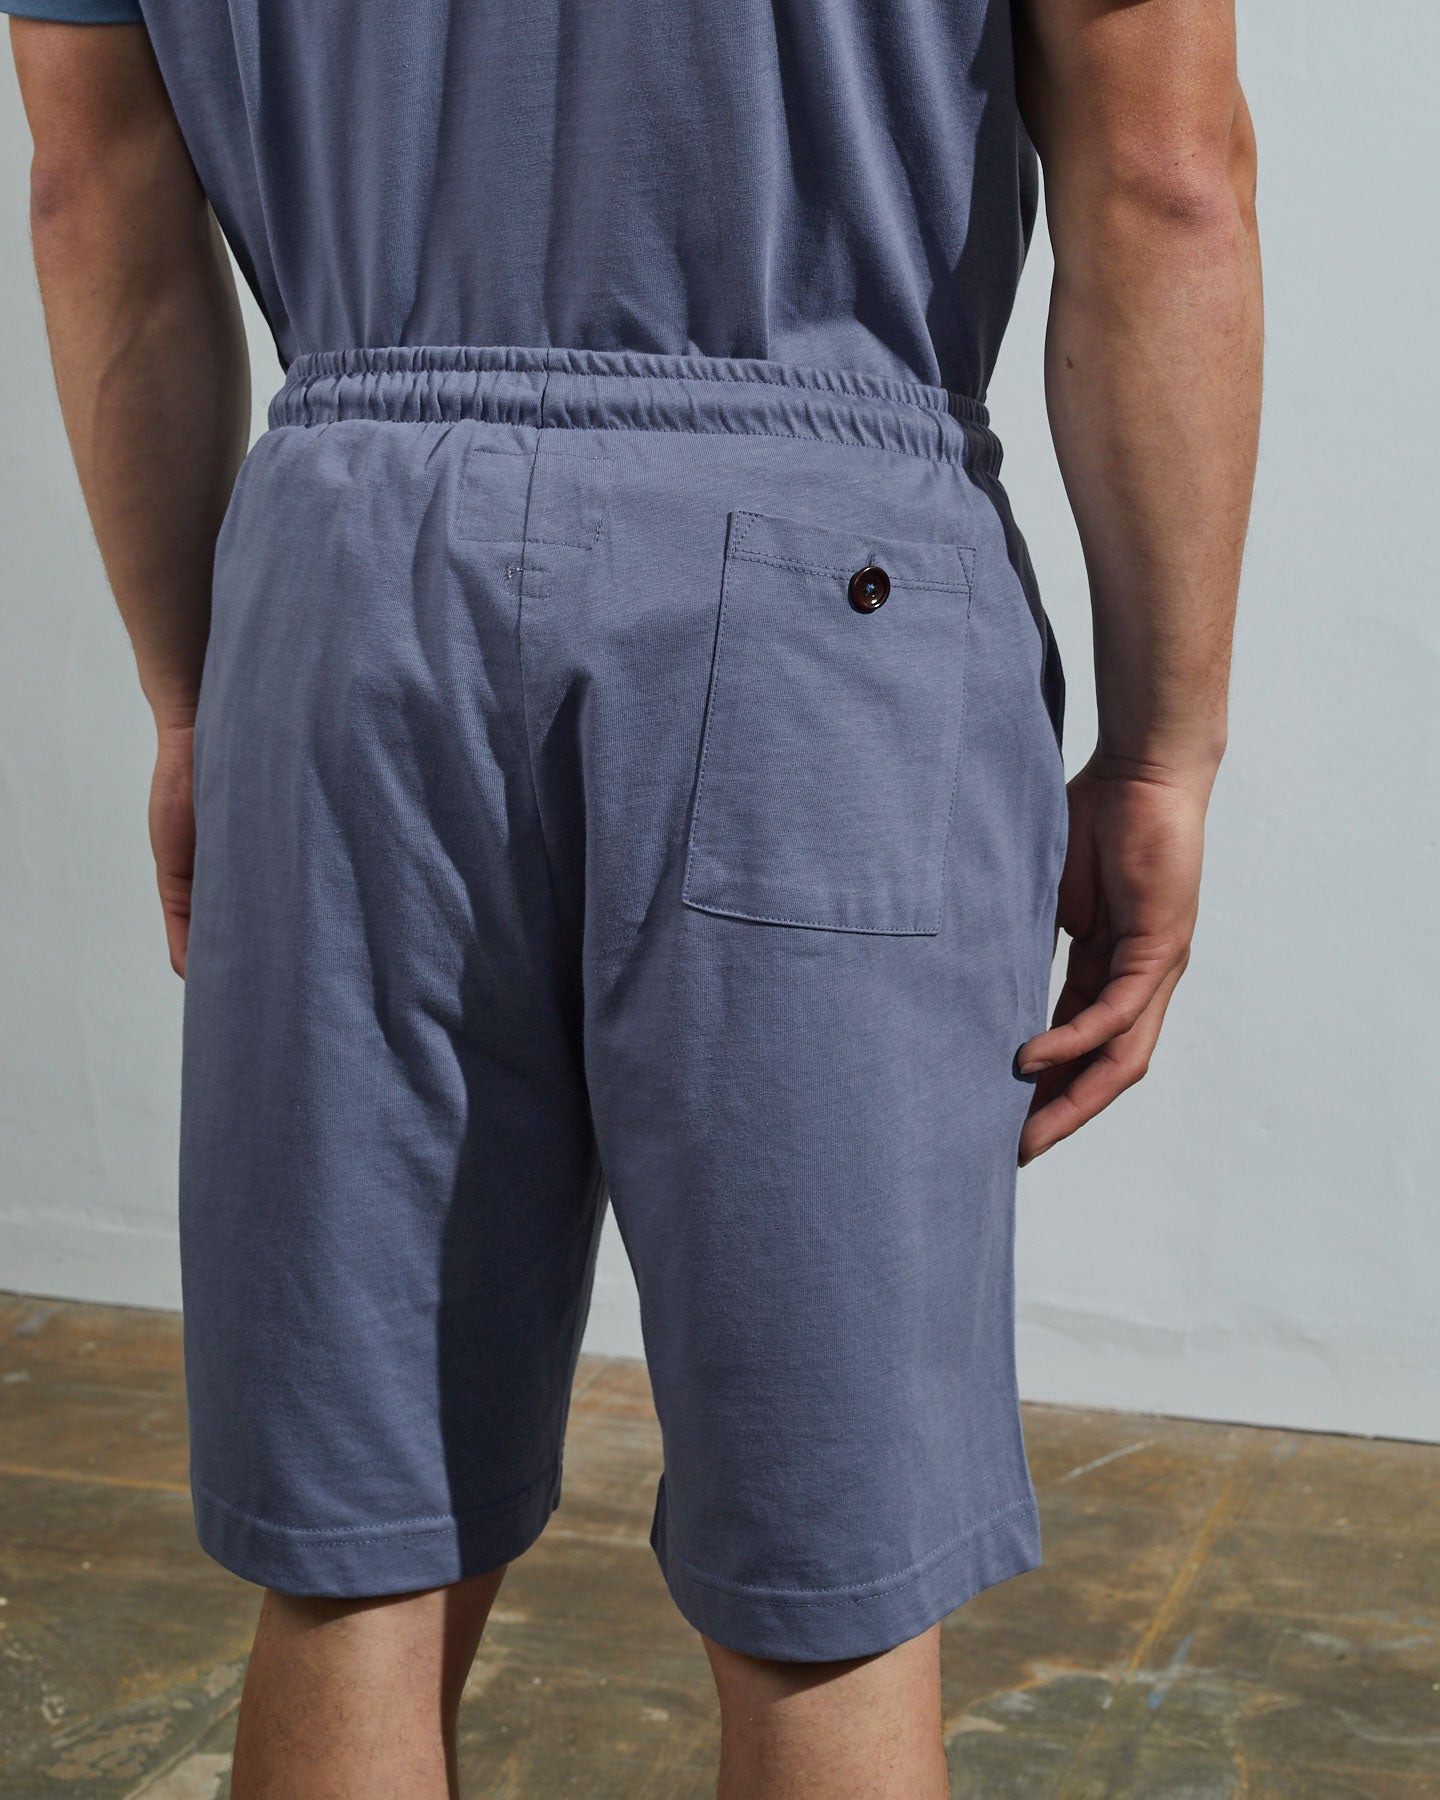 Back view of model wearing teal, relaxed cut organic cotton #7007 jersey shorts by Uskees with focus on back pocket with corozo button.